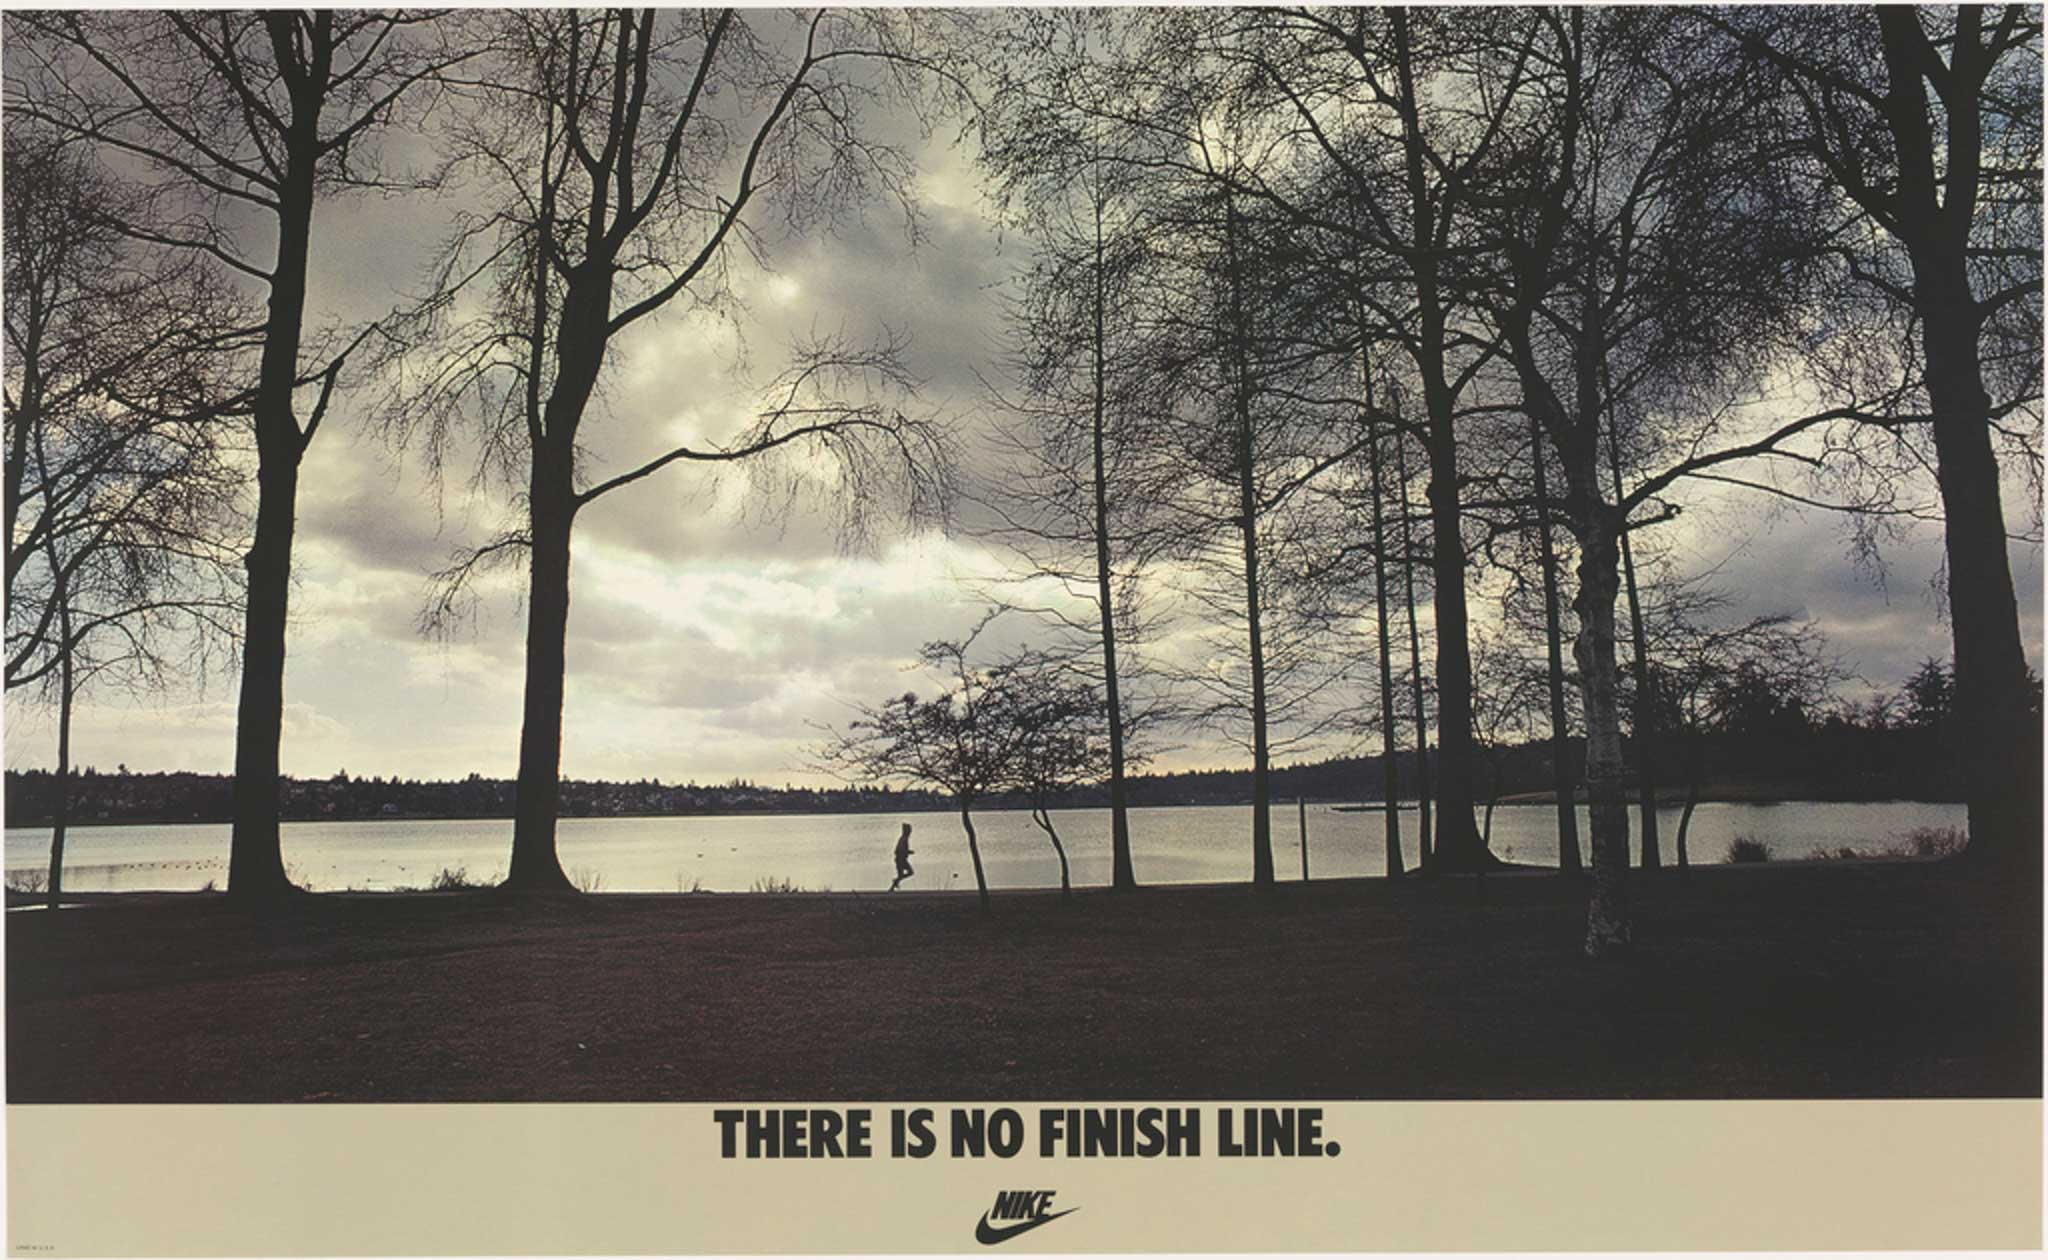 Poster, There Is No Finish Line; Designed by John Brown & Partners; Client: Nike (United States); USA;
          offset lithograph on paper; Courtesy: Cooper Hewitt, Smithsonian Design Museum